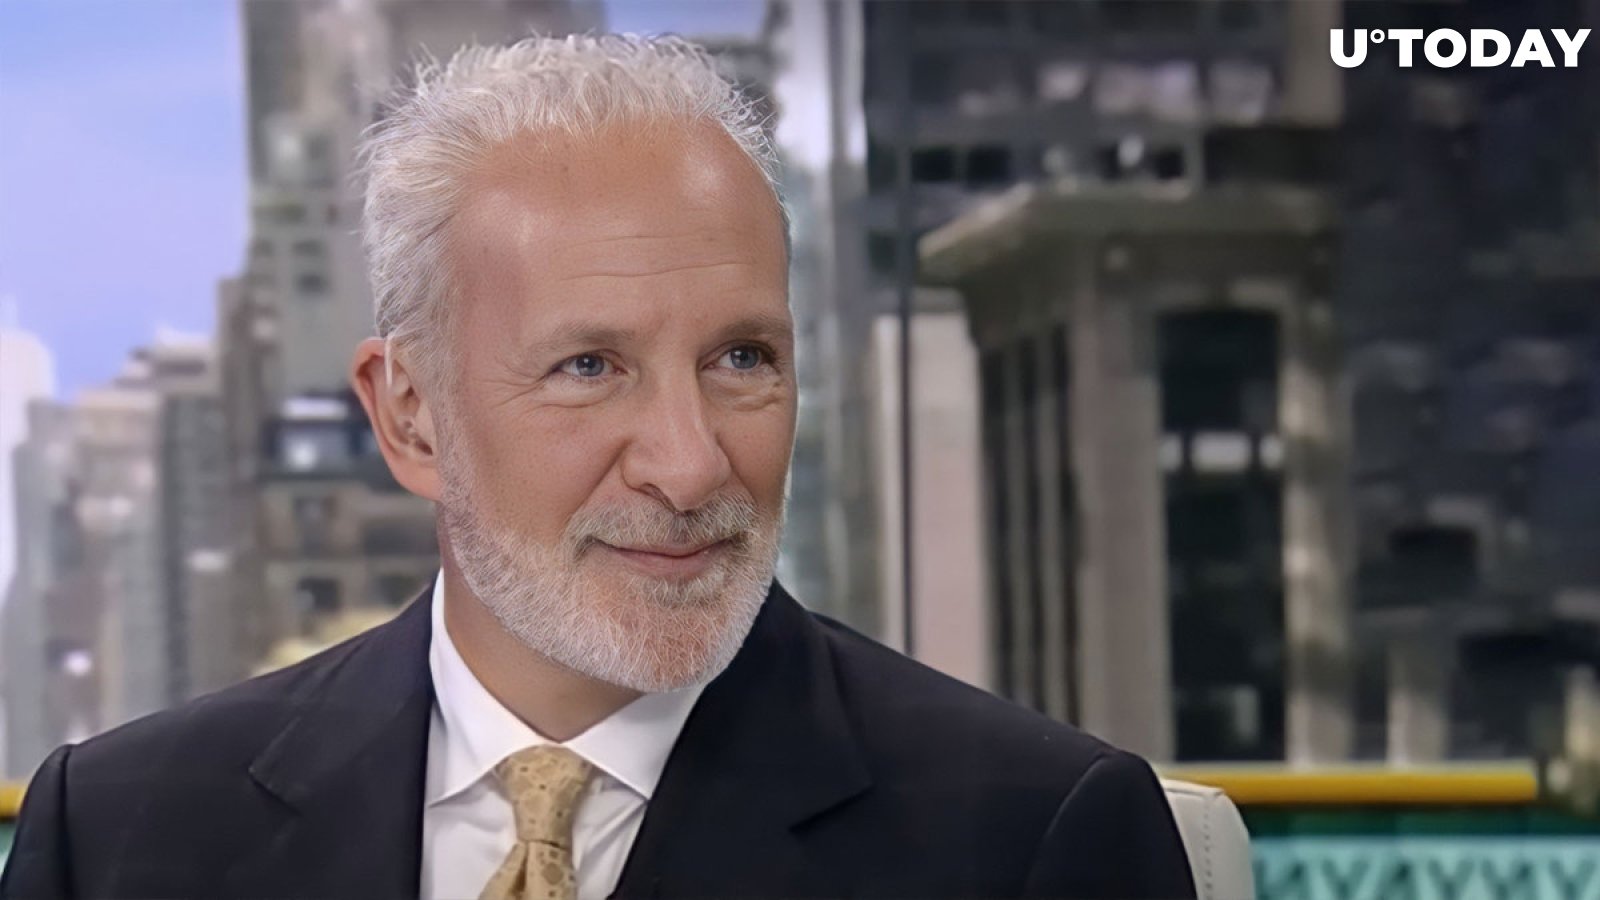 Bitcoin Critic Peter Schiff Says Wall Street About to Start Selling